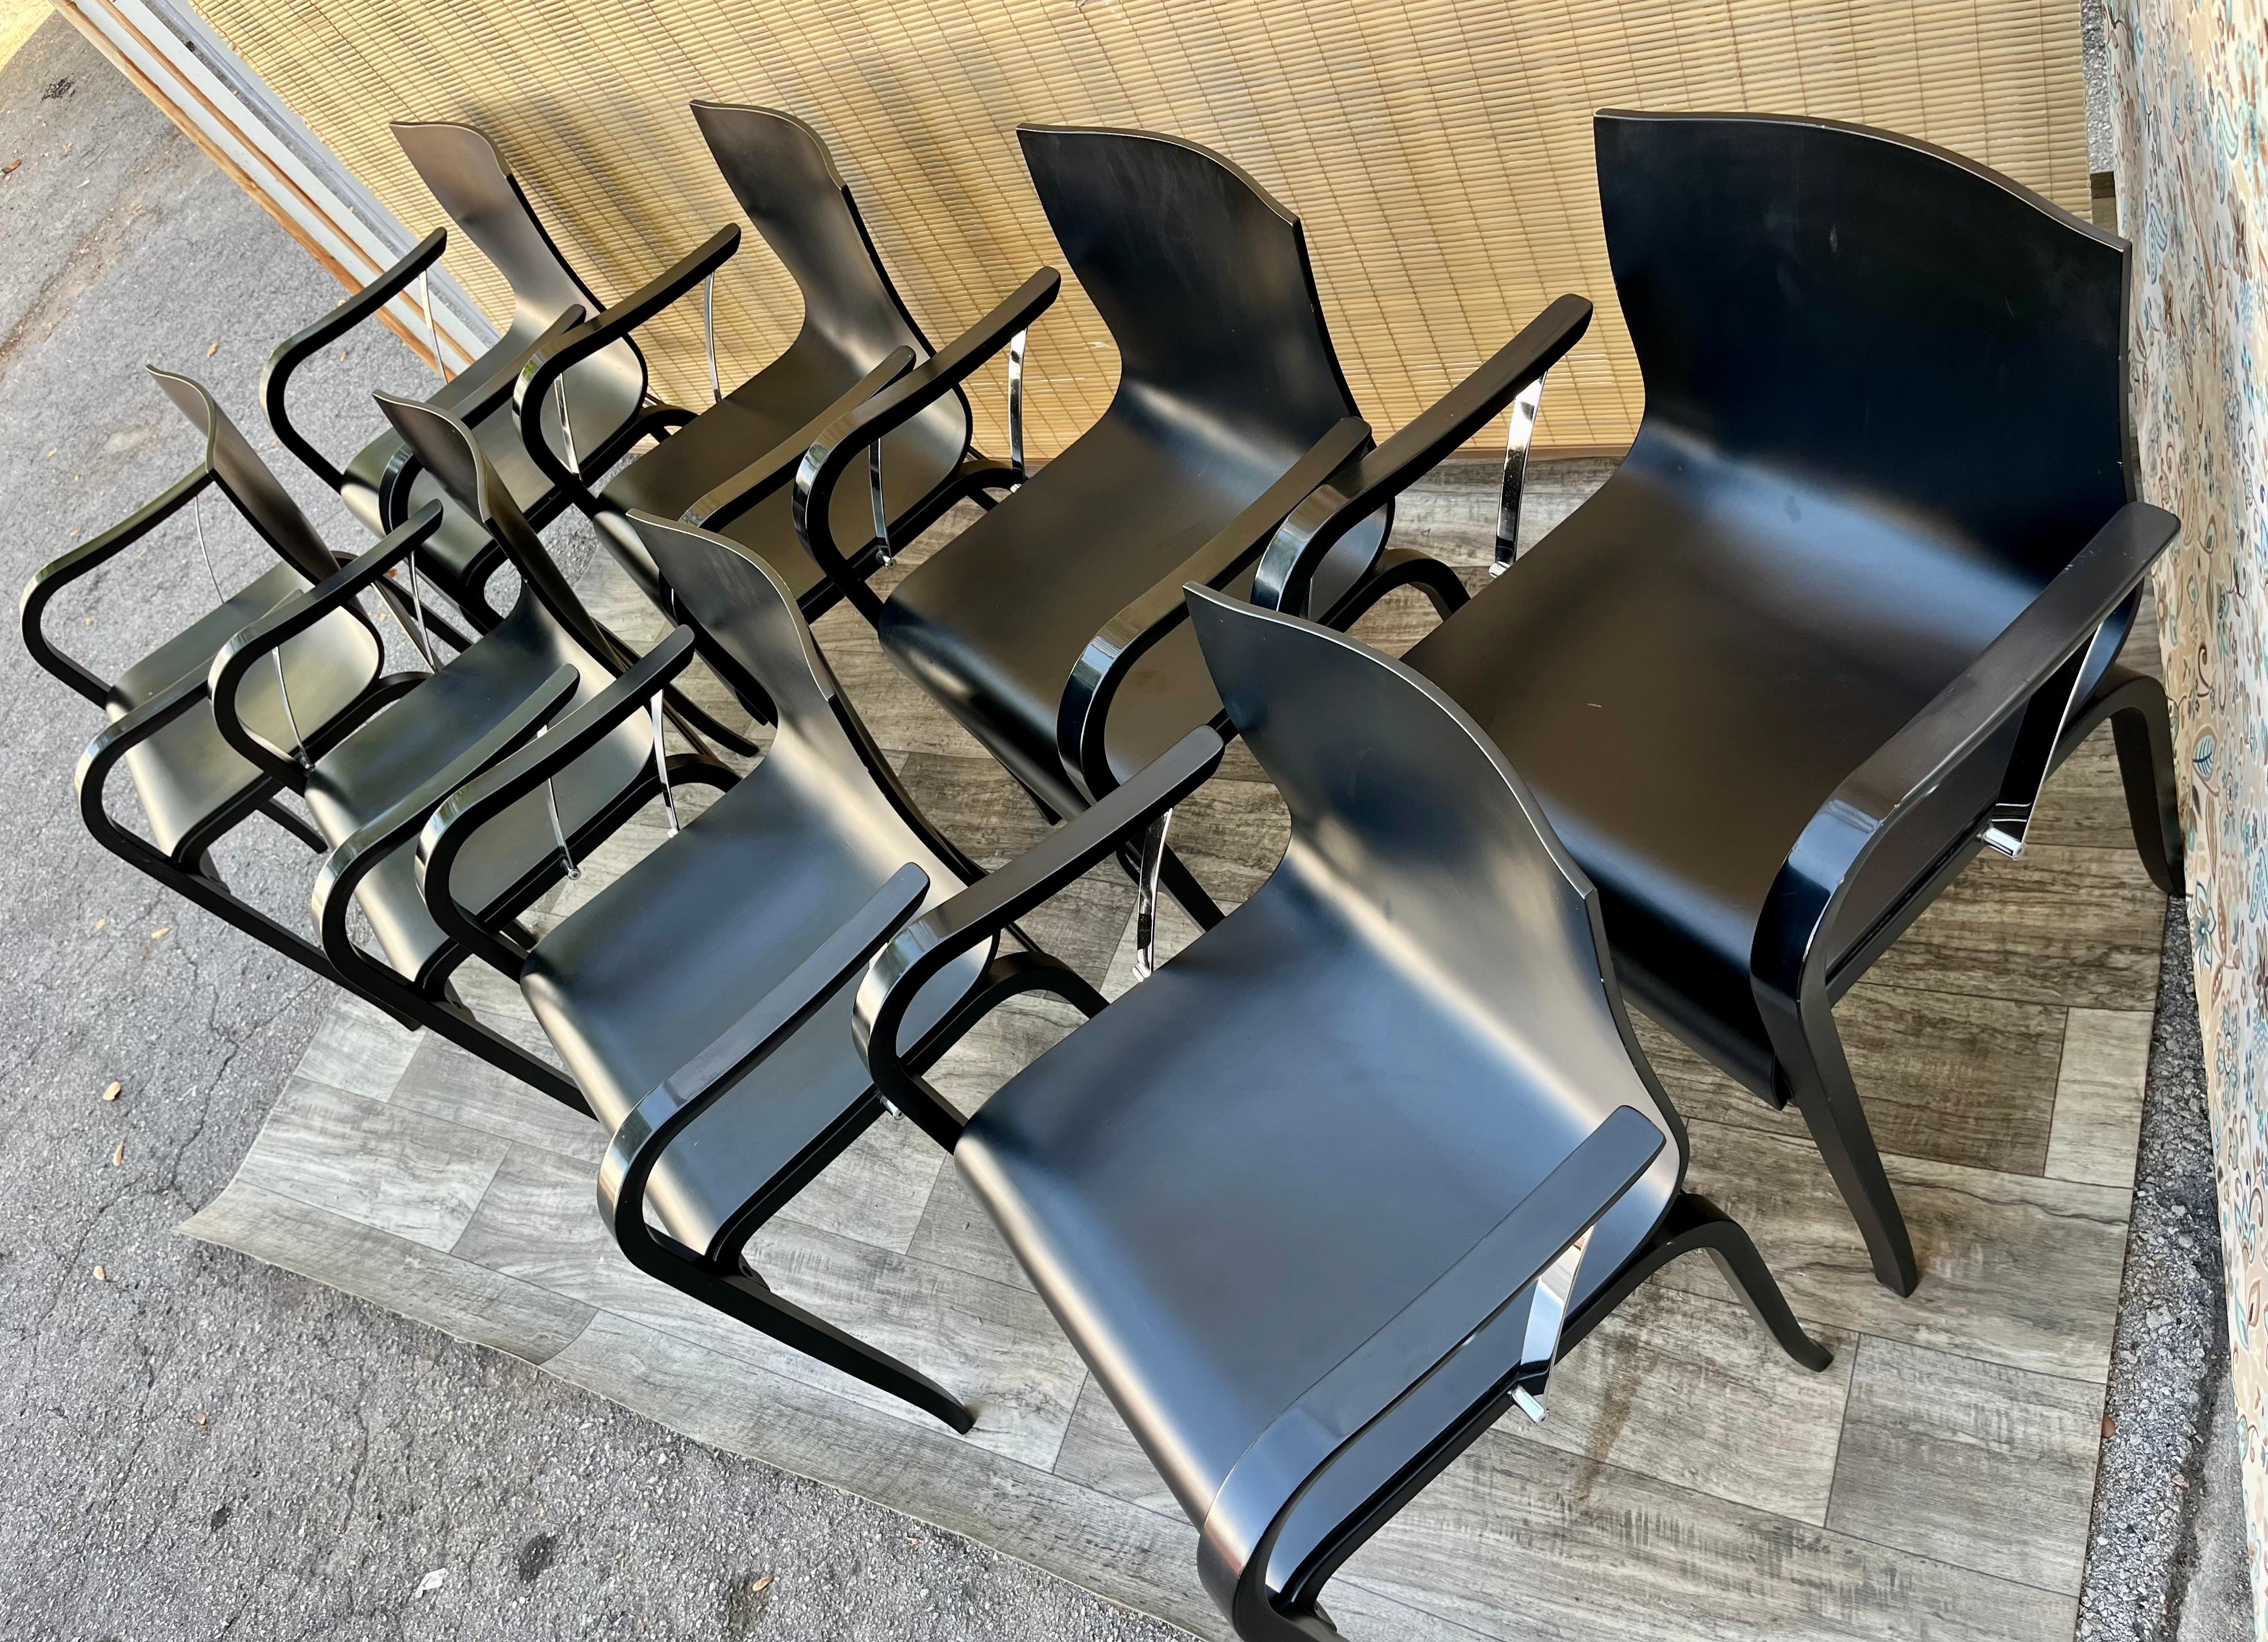 Set of 8 Postmodern Ginotta Dining Chairs by Enrico Franzolini Dining Chairs for Knoll. Circa 1980s
In 1989 Knoll introduced the Franzolini chair, a thoroughly modern interpretation of the bentwood chair. The design, an elegant combination of wood